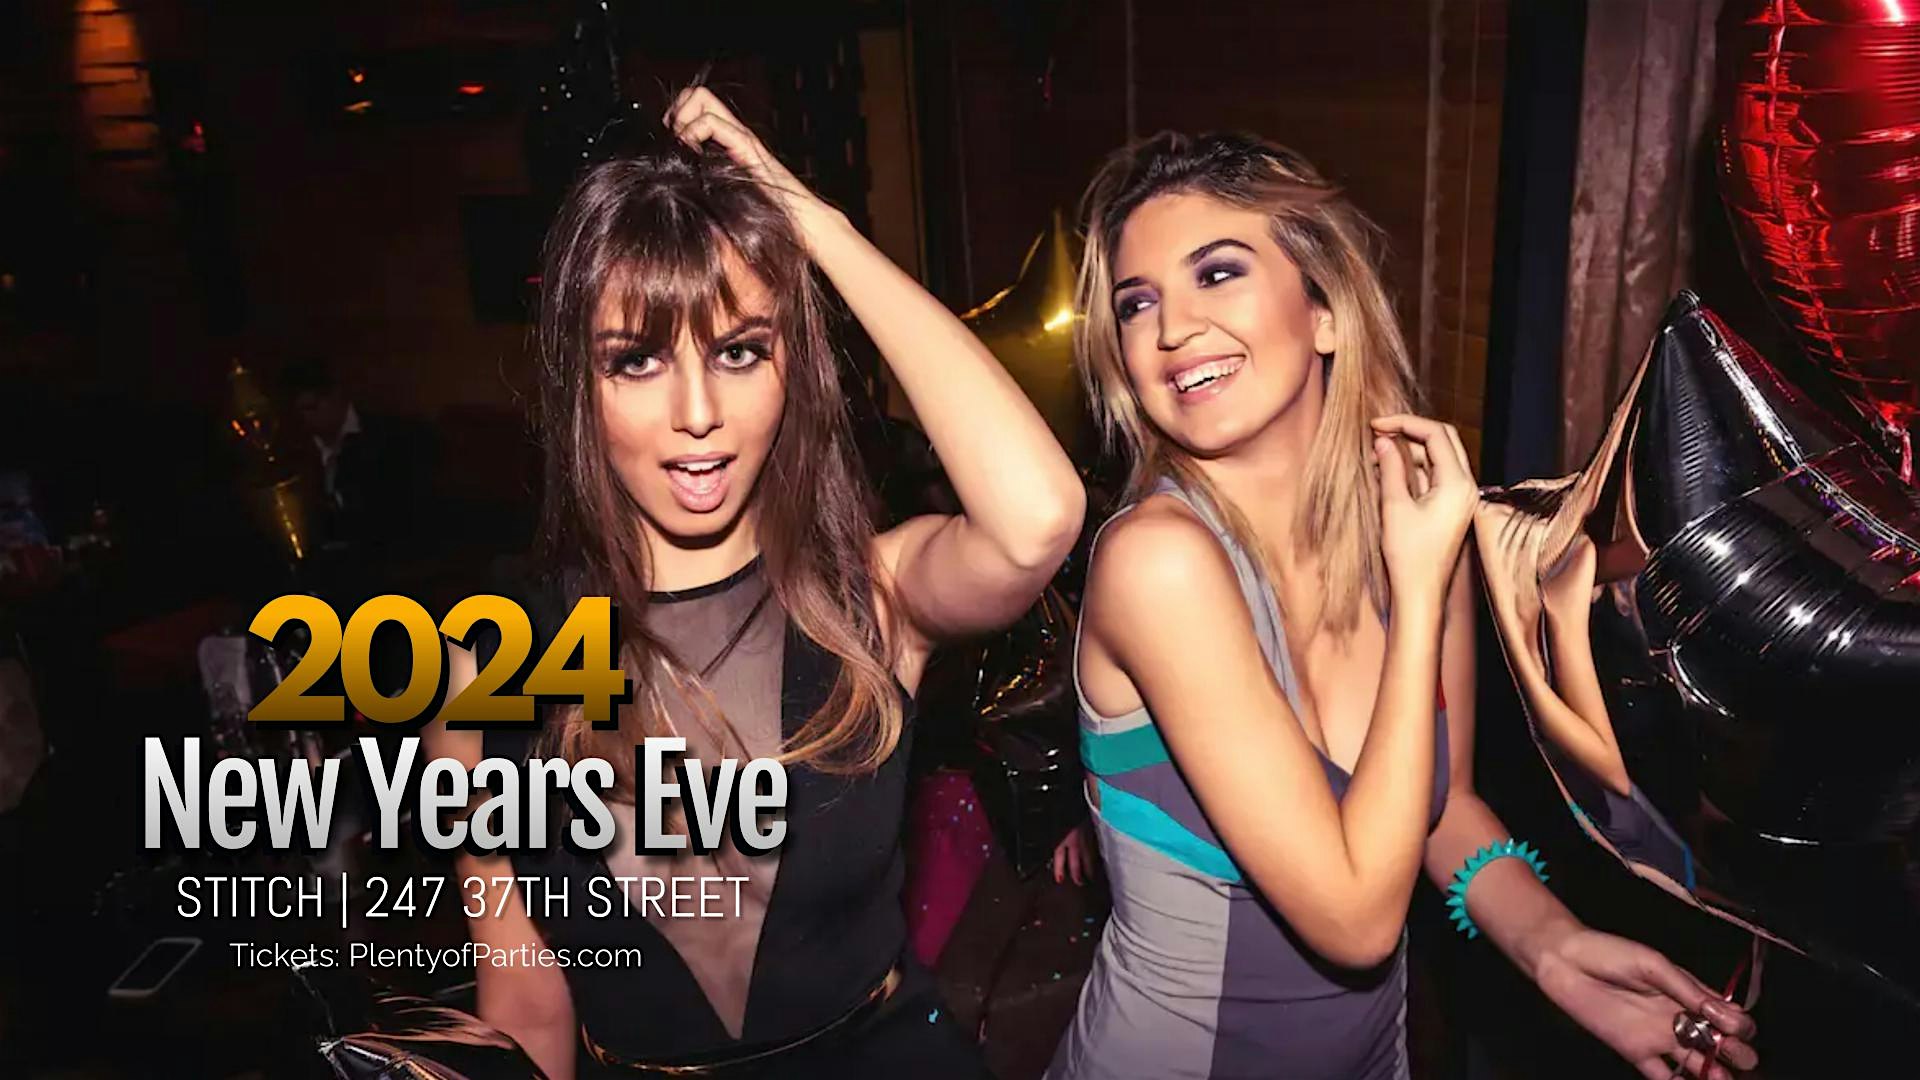 Annual New Years Eve Party | NYE 2024 @ Stitch NYC (Near Times Square)